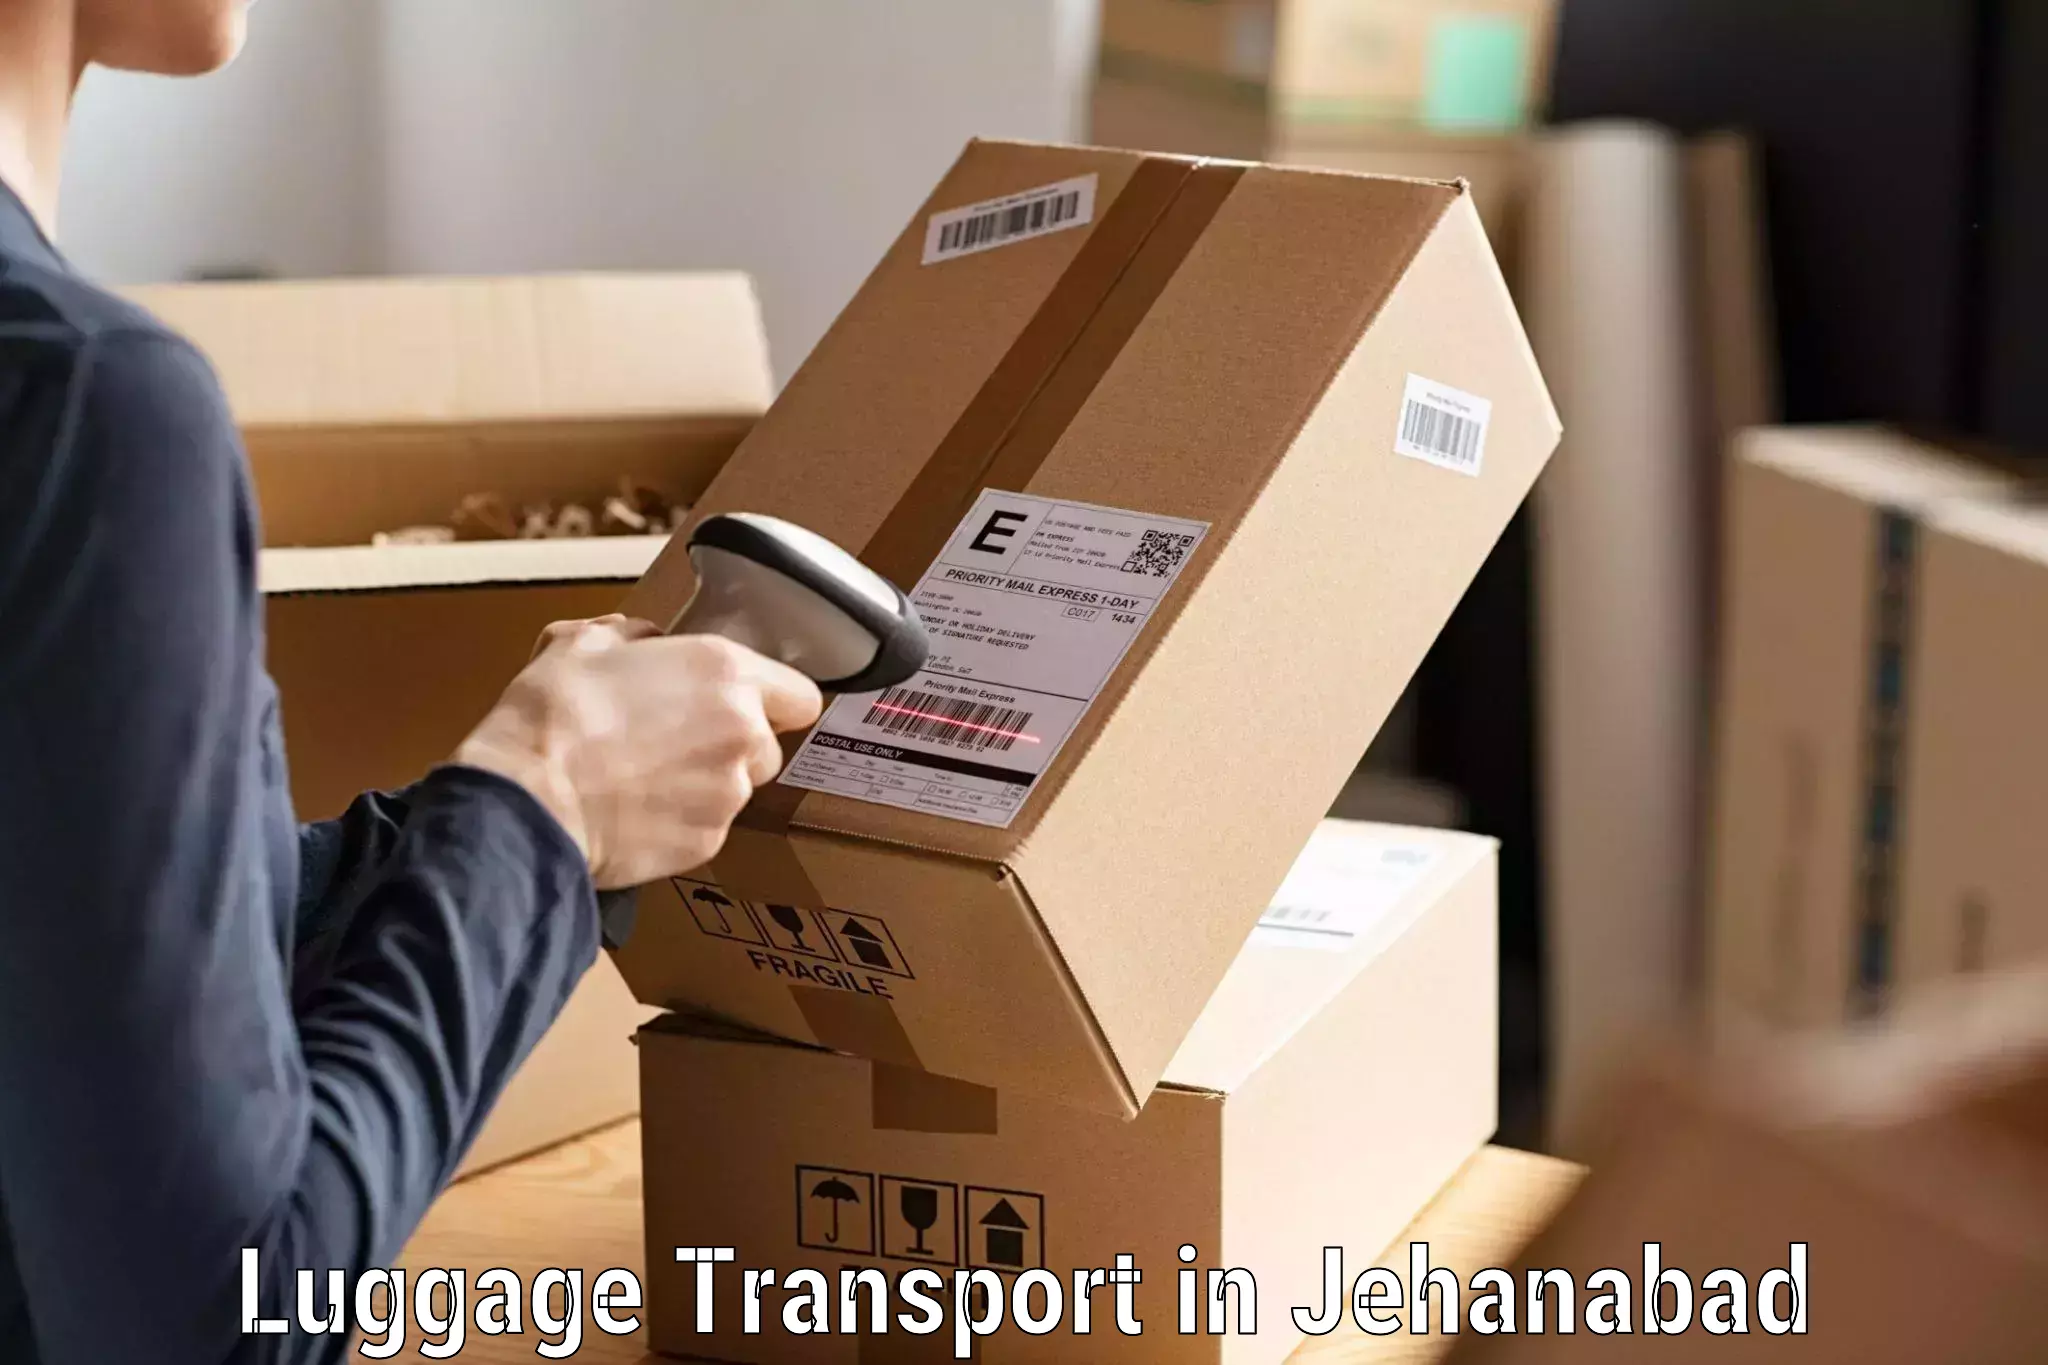 Luggage delivery operations in Jehanabad